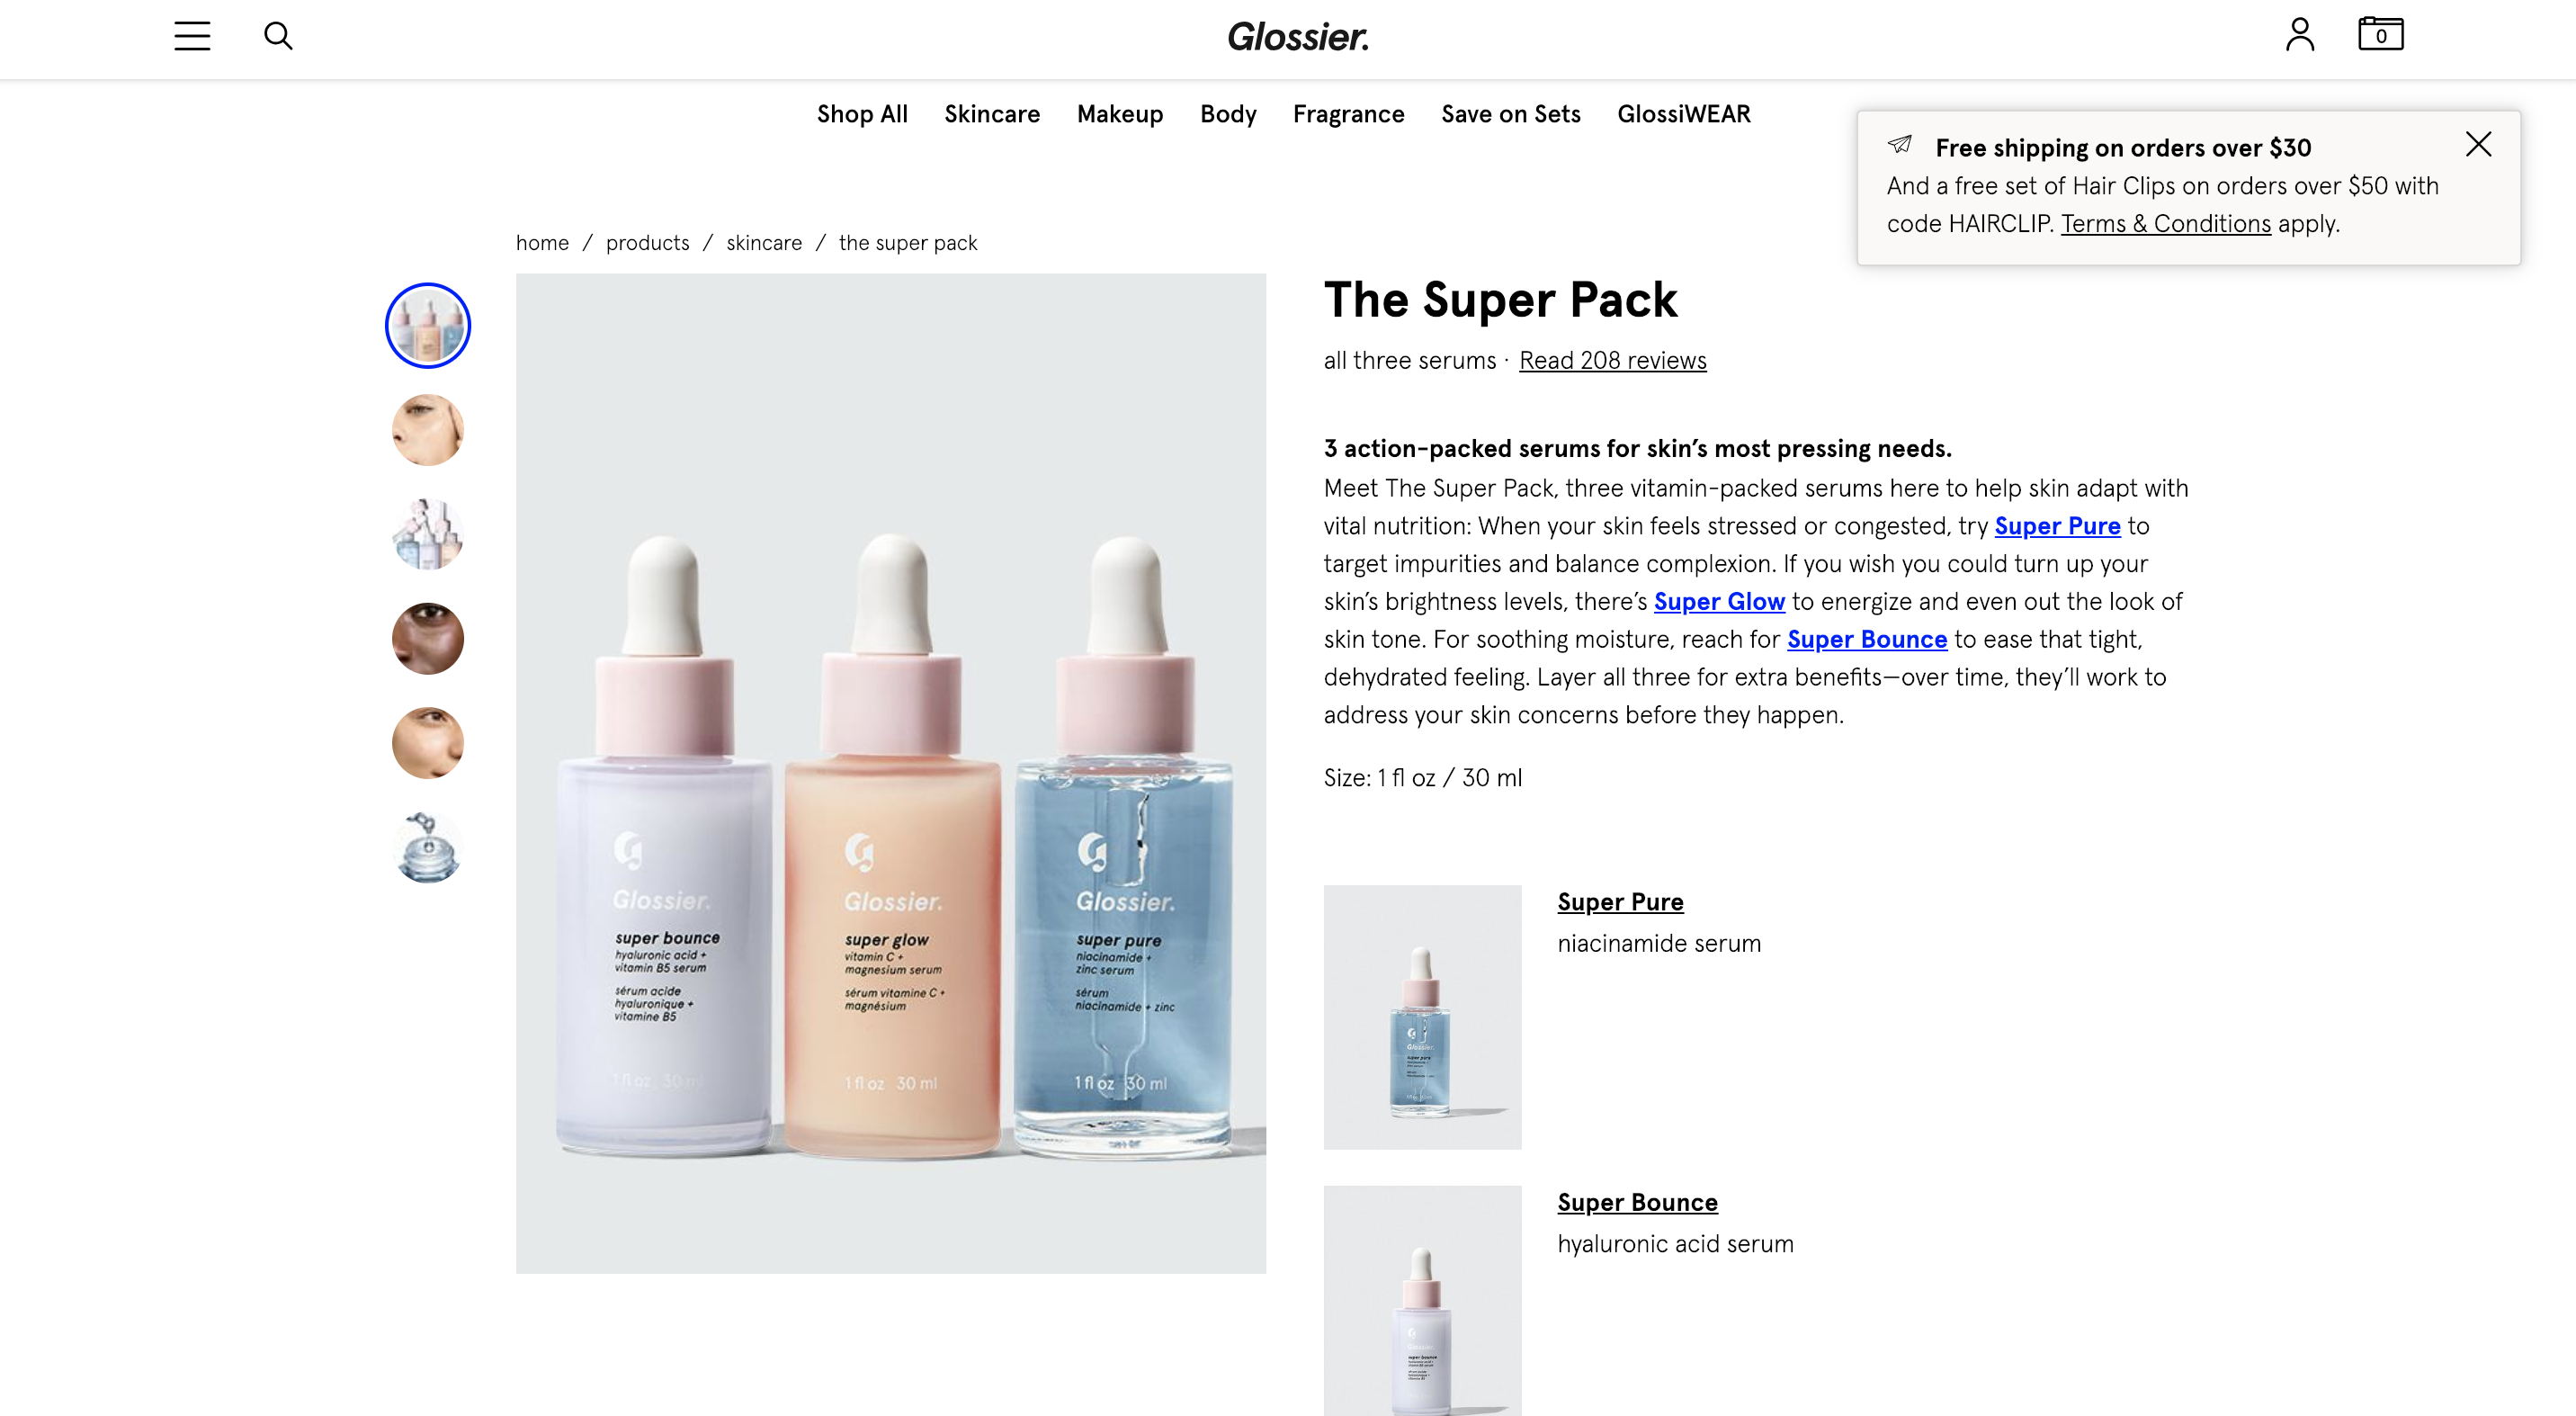 glossier-super-pack-product-detail-page